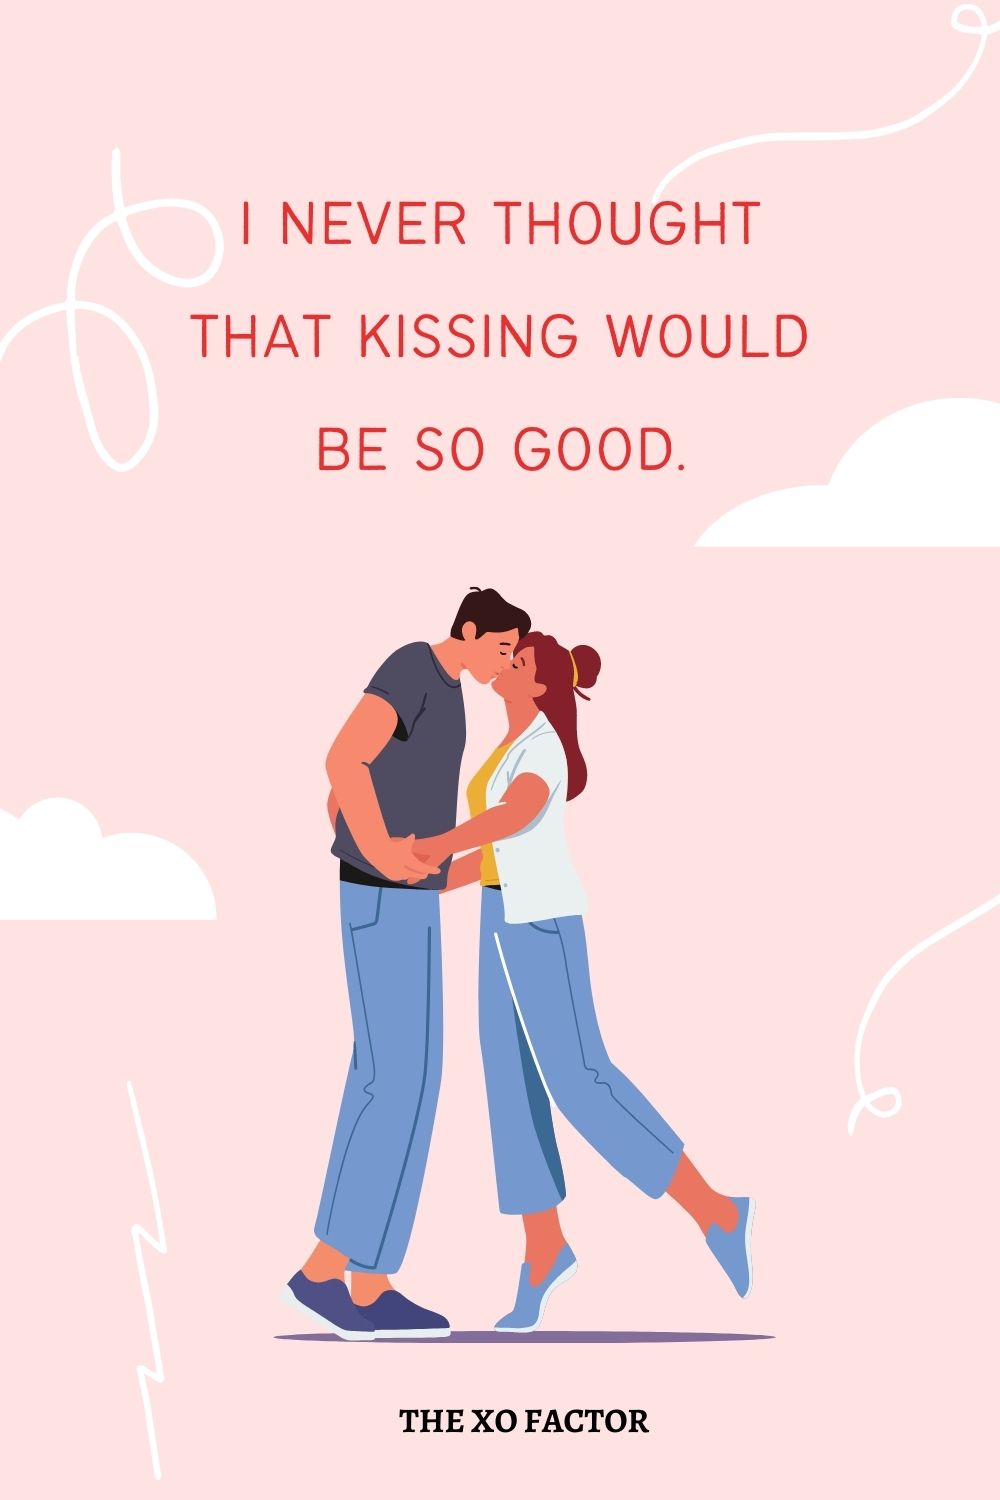 I never thought that kissing would be so good.